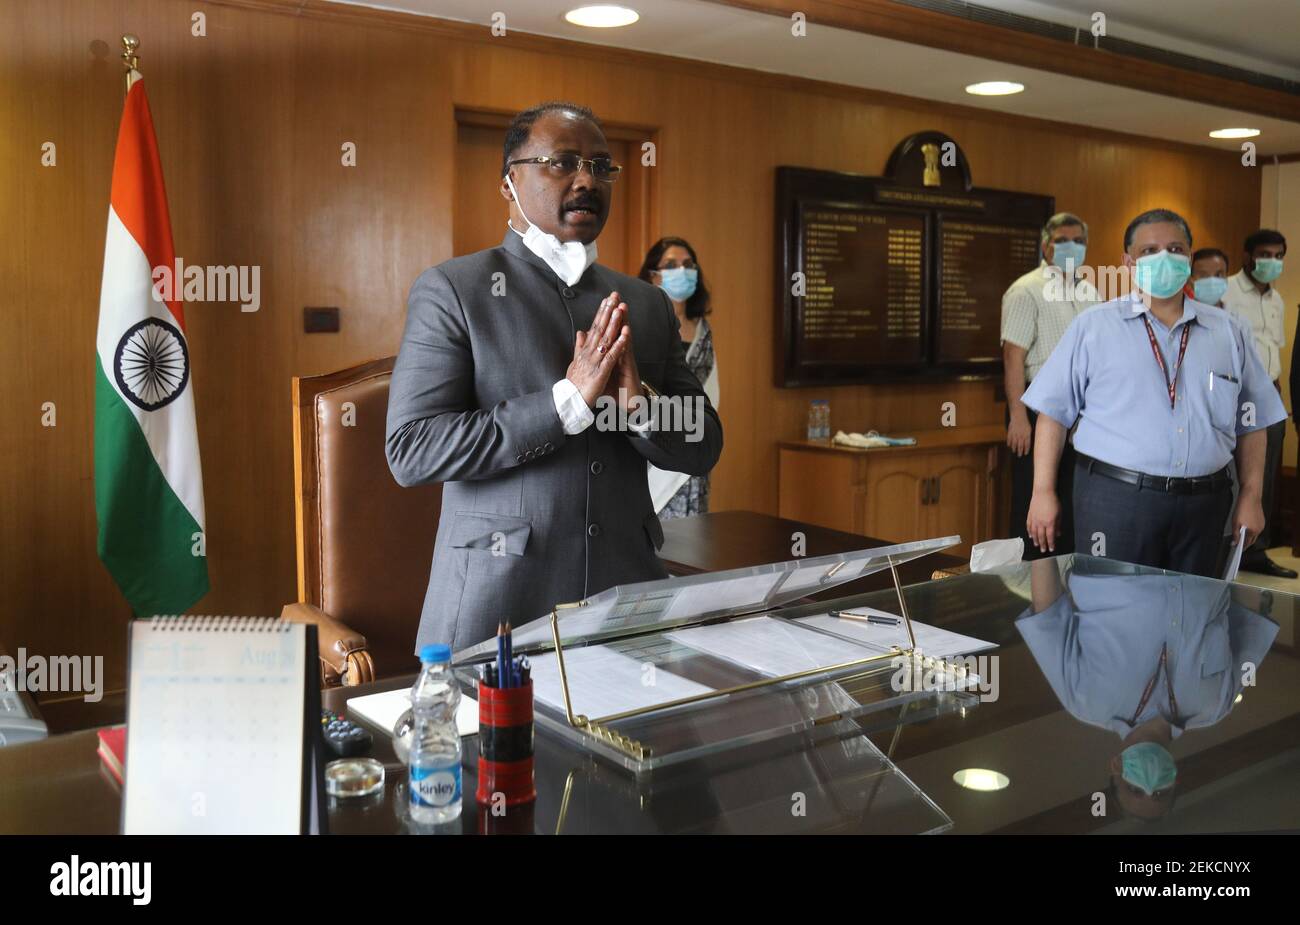 Girish Chandra Murmu seen wearing a facemask around his neck while greeting  other officials during his first day in office. Girish Chandra Murmu has assumed  office as the Comptroller and Auditor General (